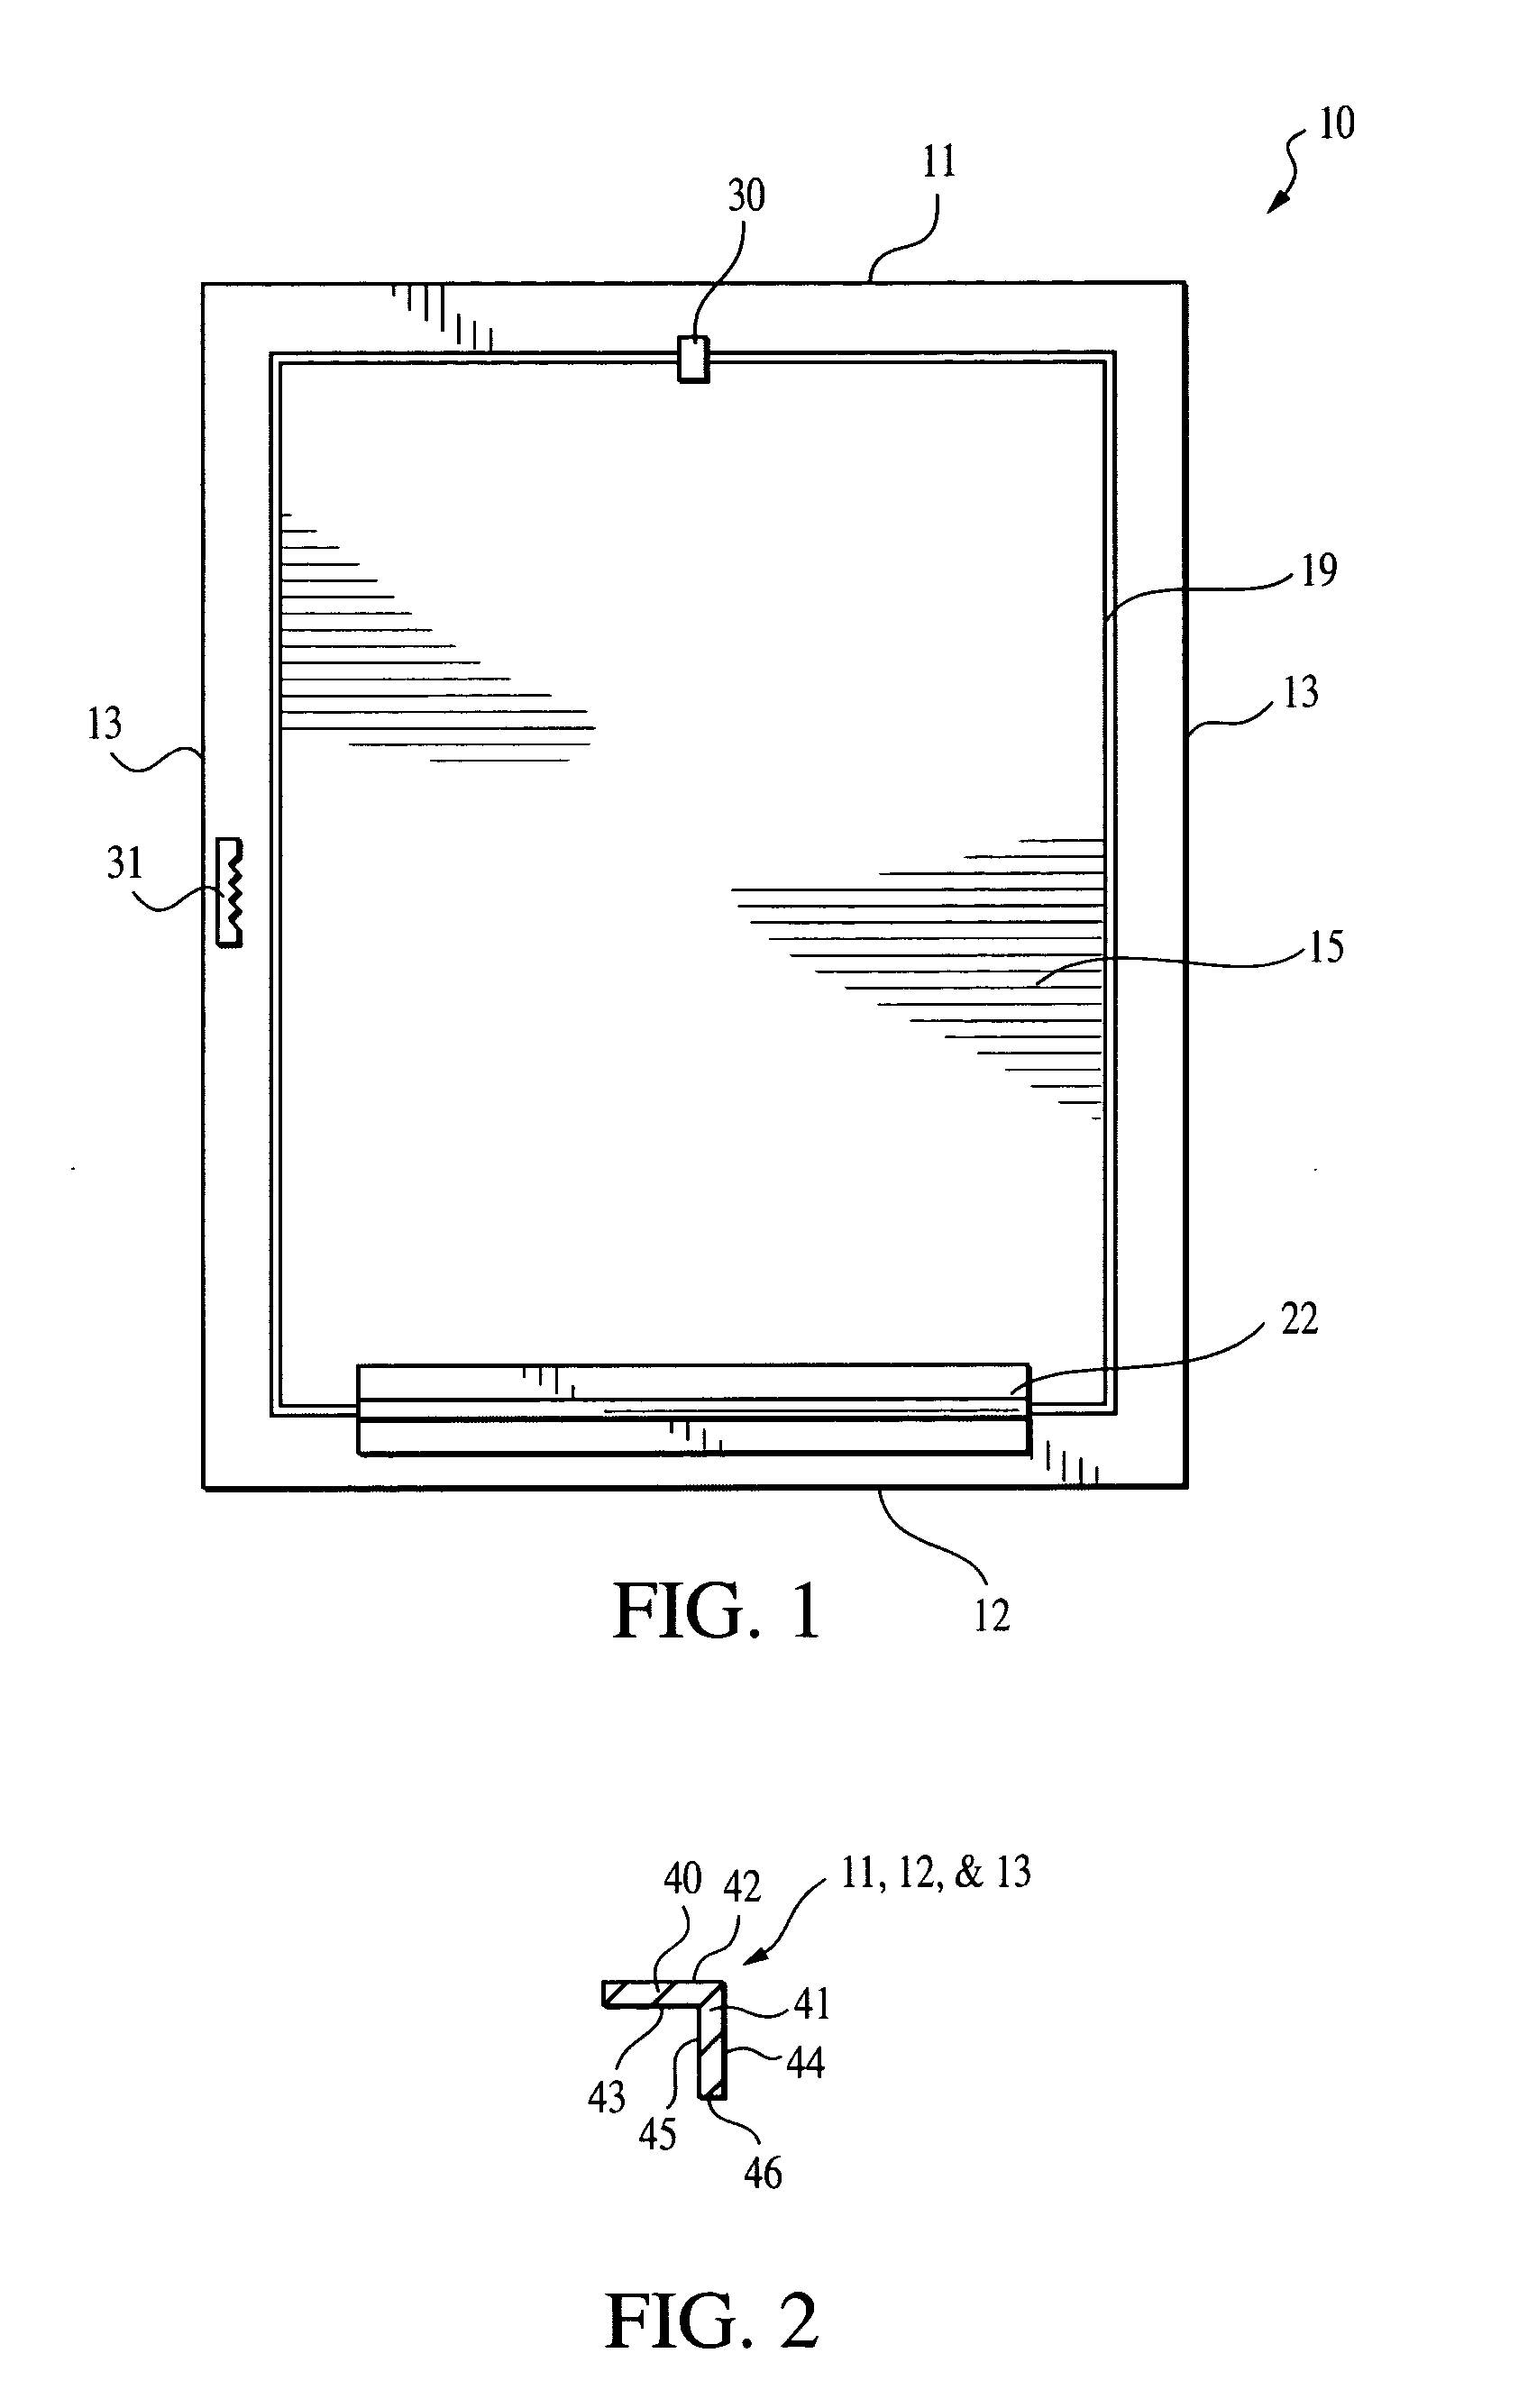 Frame assembly for attachment to a commercially available picture frame